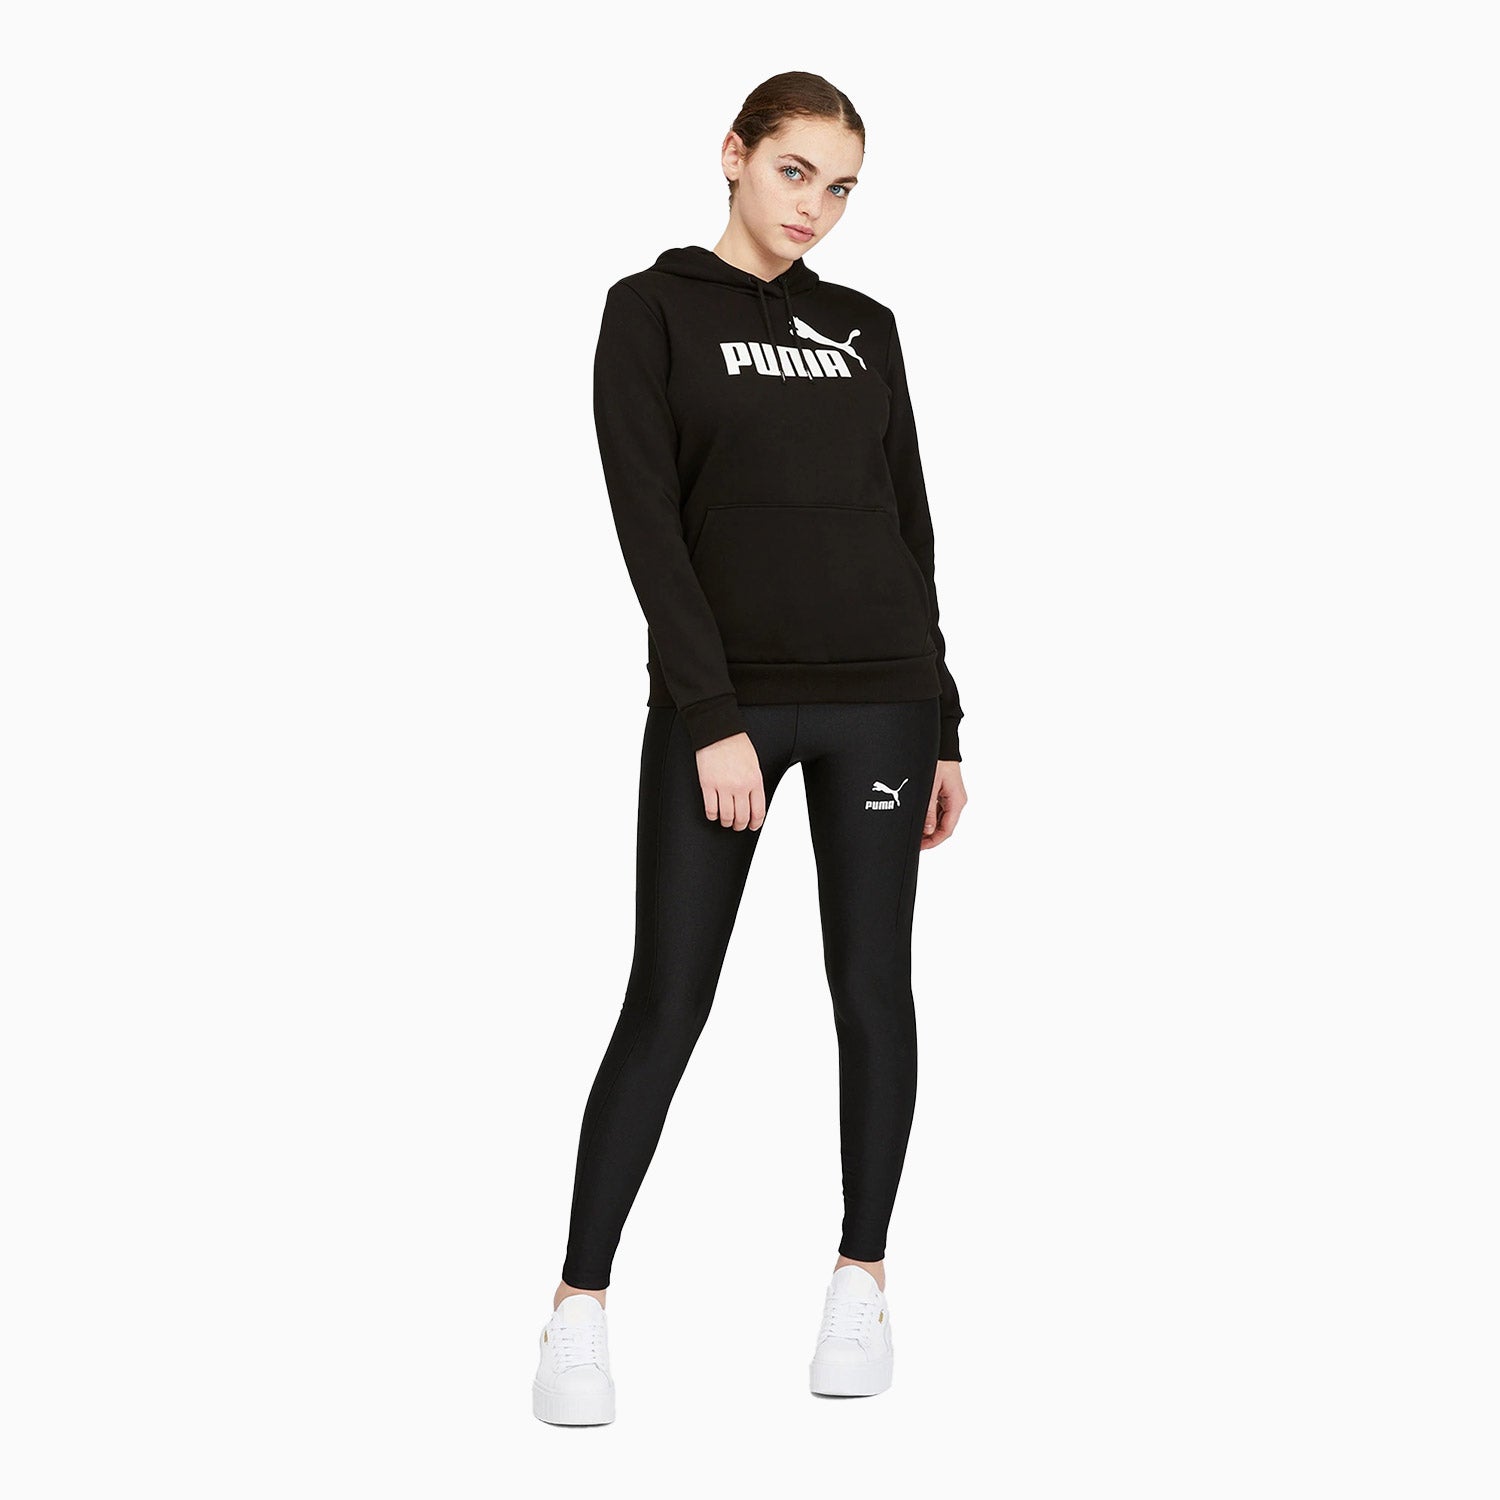 Puma Women's Essential Outfit - Color: Black - Tops and Bottoms USA -